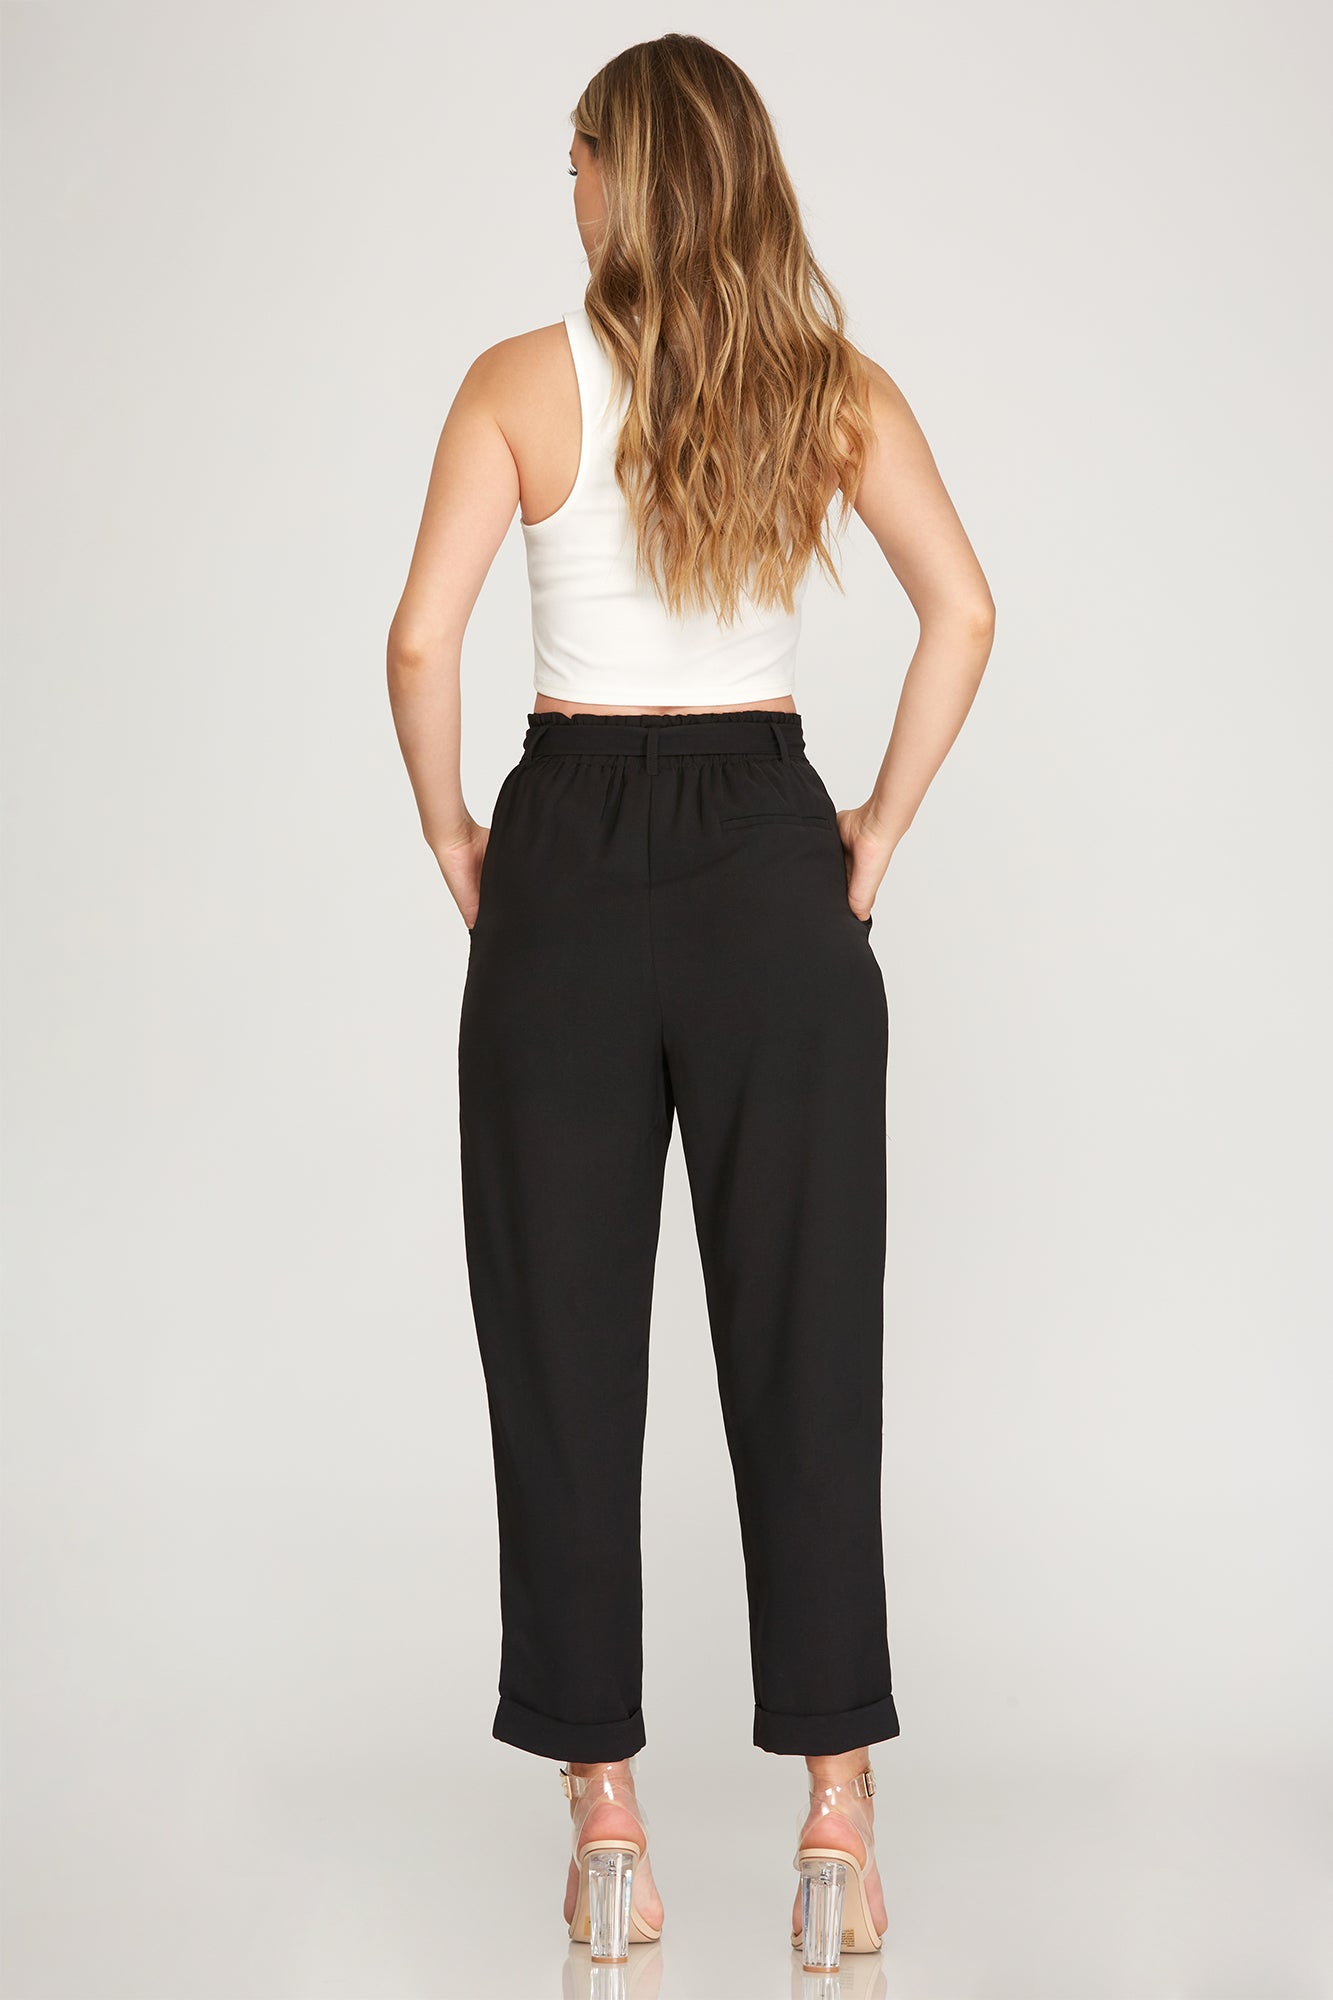 Belted Dress Pant - Black-Pants- Hometown Style HTS, women's in store and online boutique located in Ingersoll, Ontario